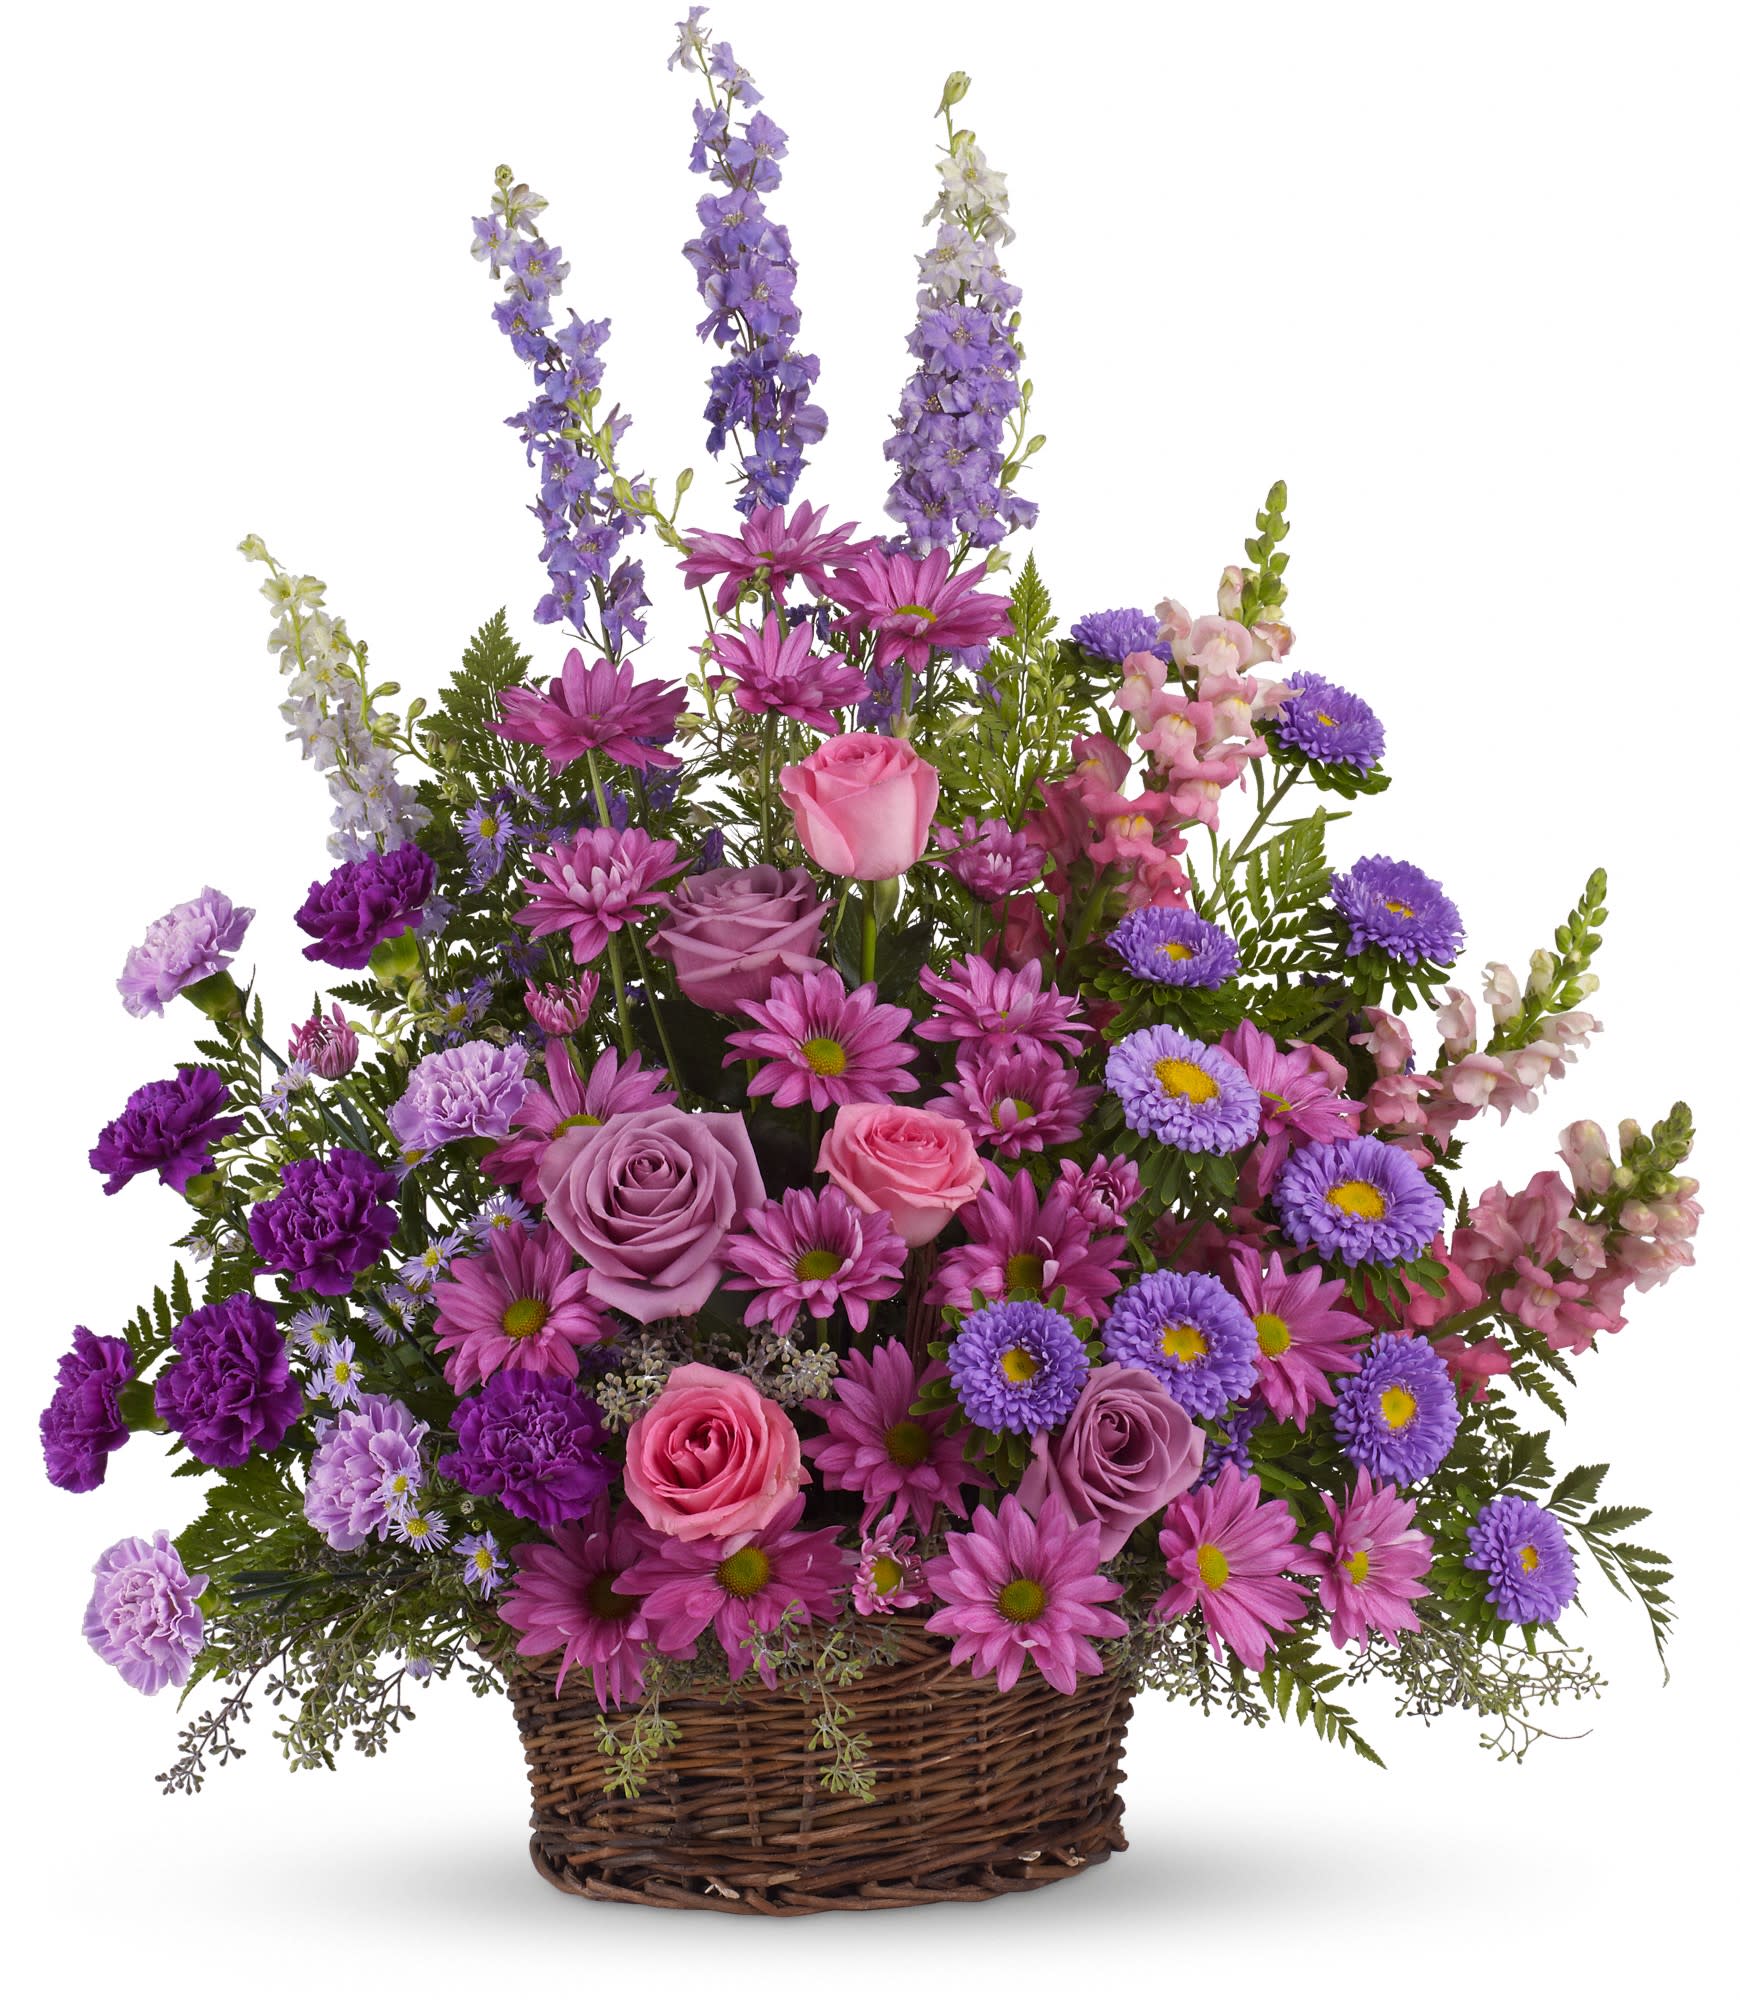 Gracious Lavender Basket (T235-1A) - Soothing lavender, respectful purple and compassionate pinks are combined beautifully in this basket overflowing with garden flowers.A lovely way to share your thoughts and pay tribute to someone special. 